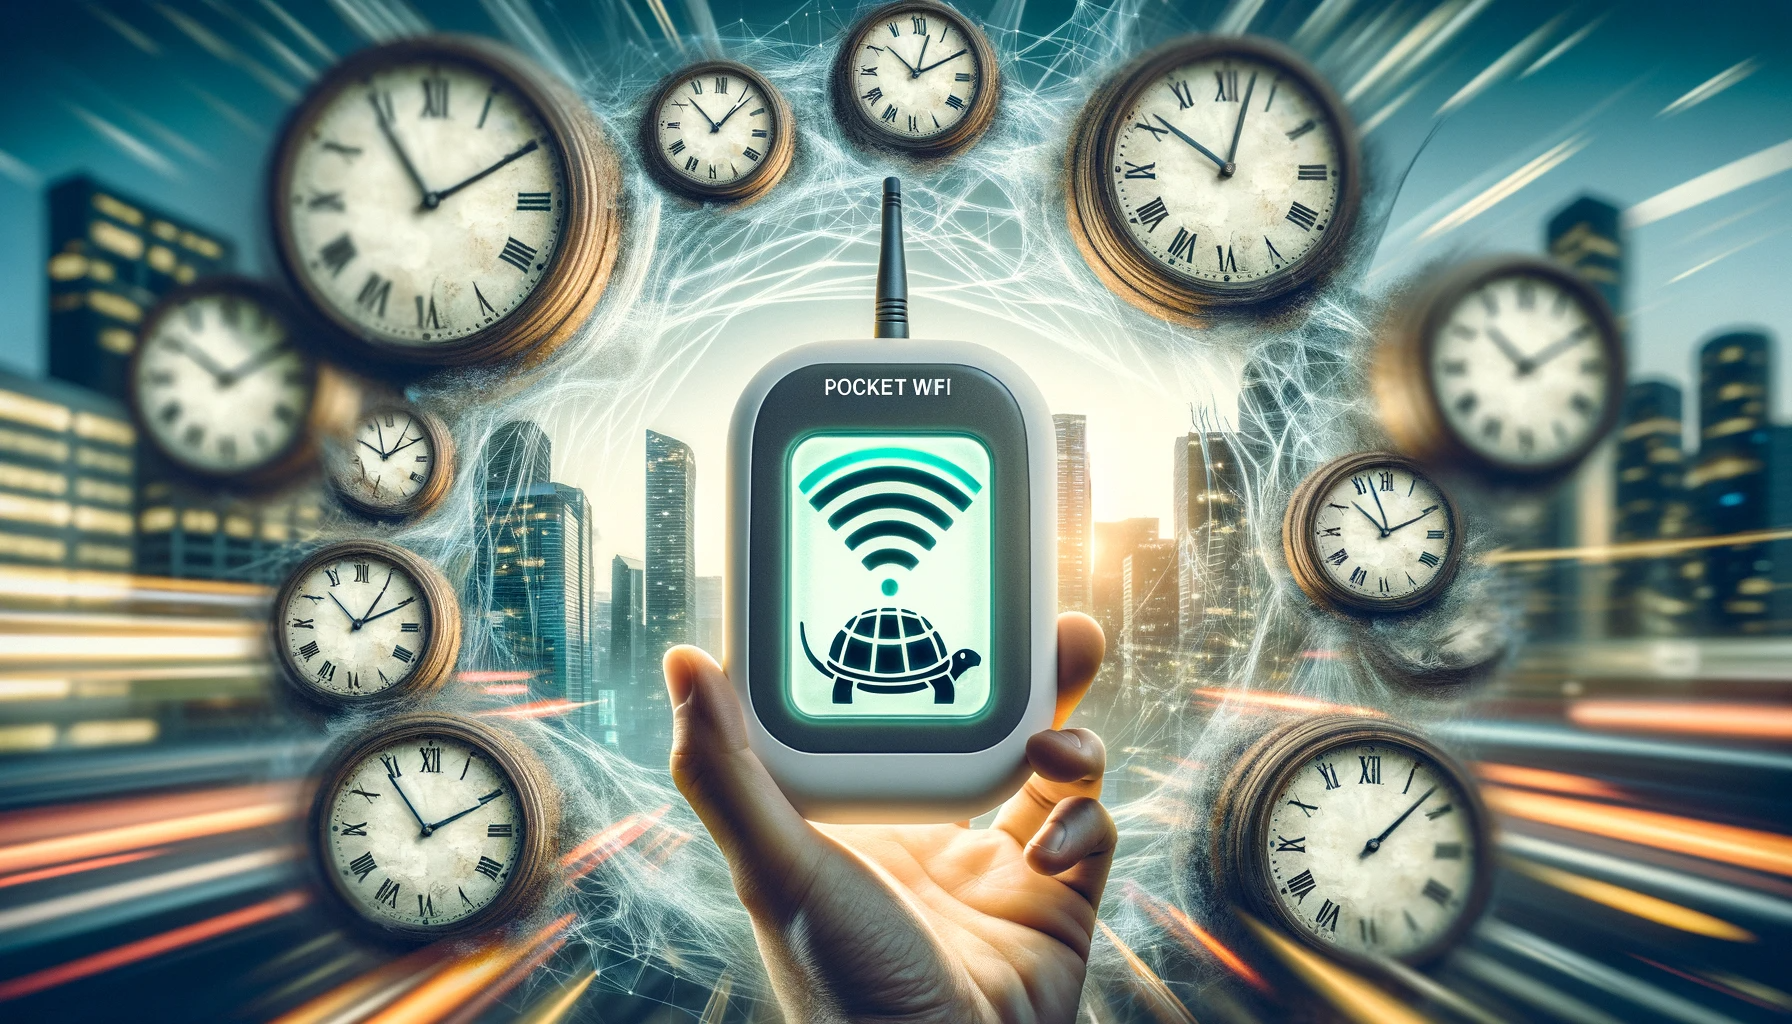 DALL·E 2024-01-19 17.03.17 - A digital artwork showing a pocket WiFi device with a slow speed indicator on its screen, surrounded by a series of clocks with their hands moving rap